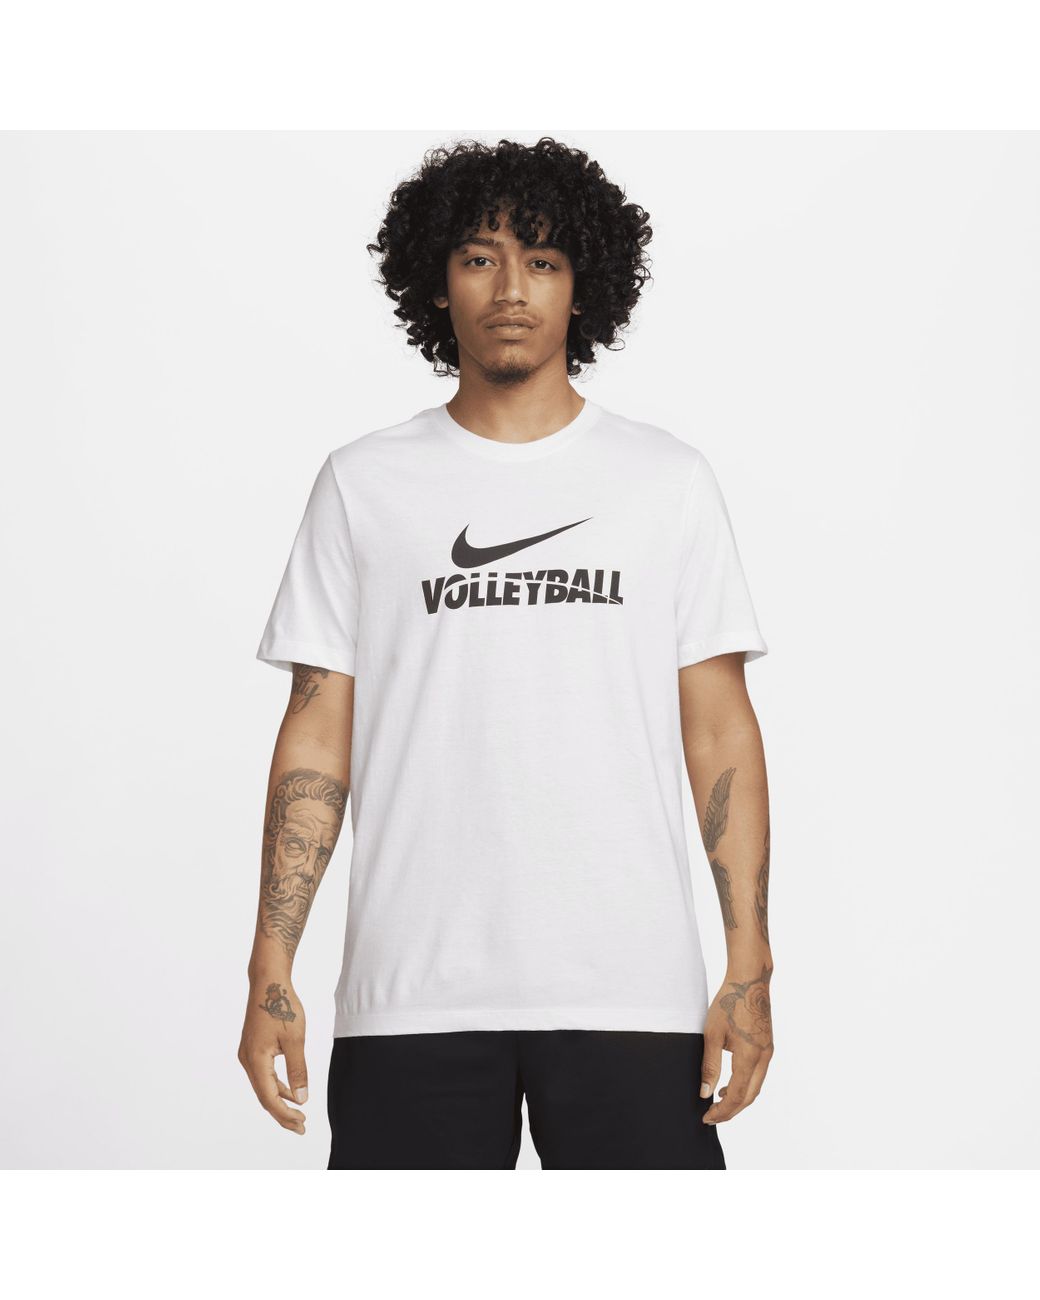 Nike Volleyball T-shirt In White, for Men | Lyst